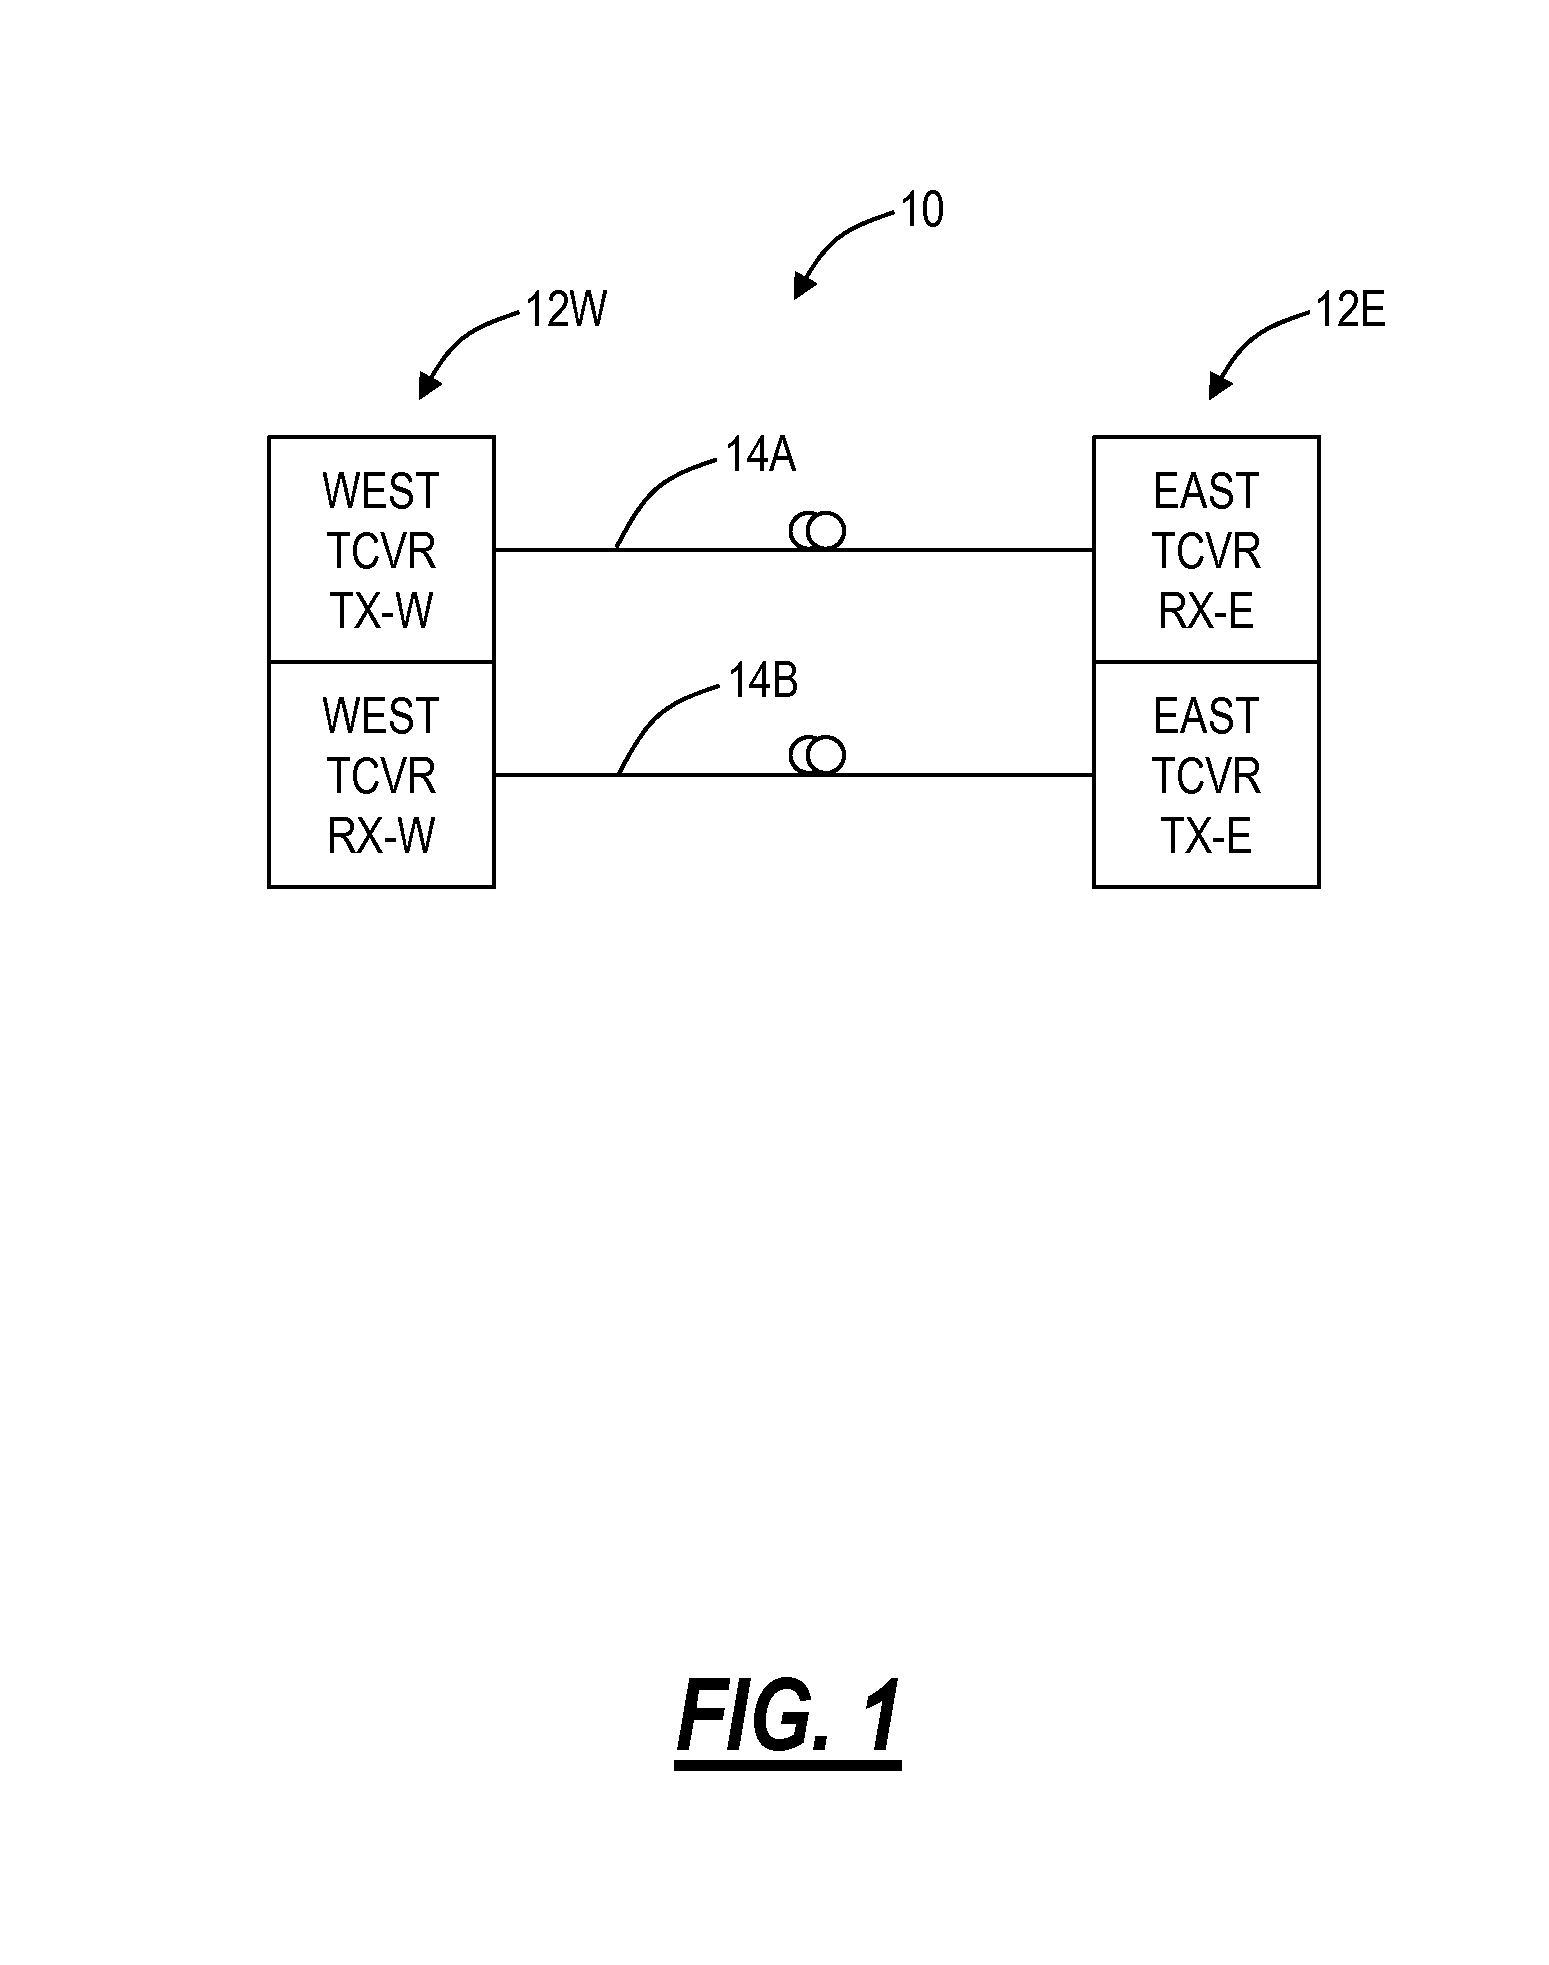 High speed optical communication systems and methods with flexible bandwidth adaptation